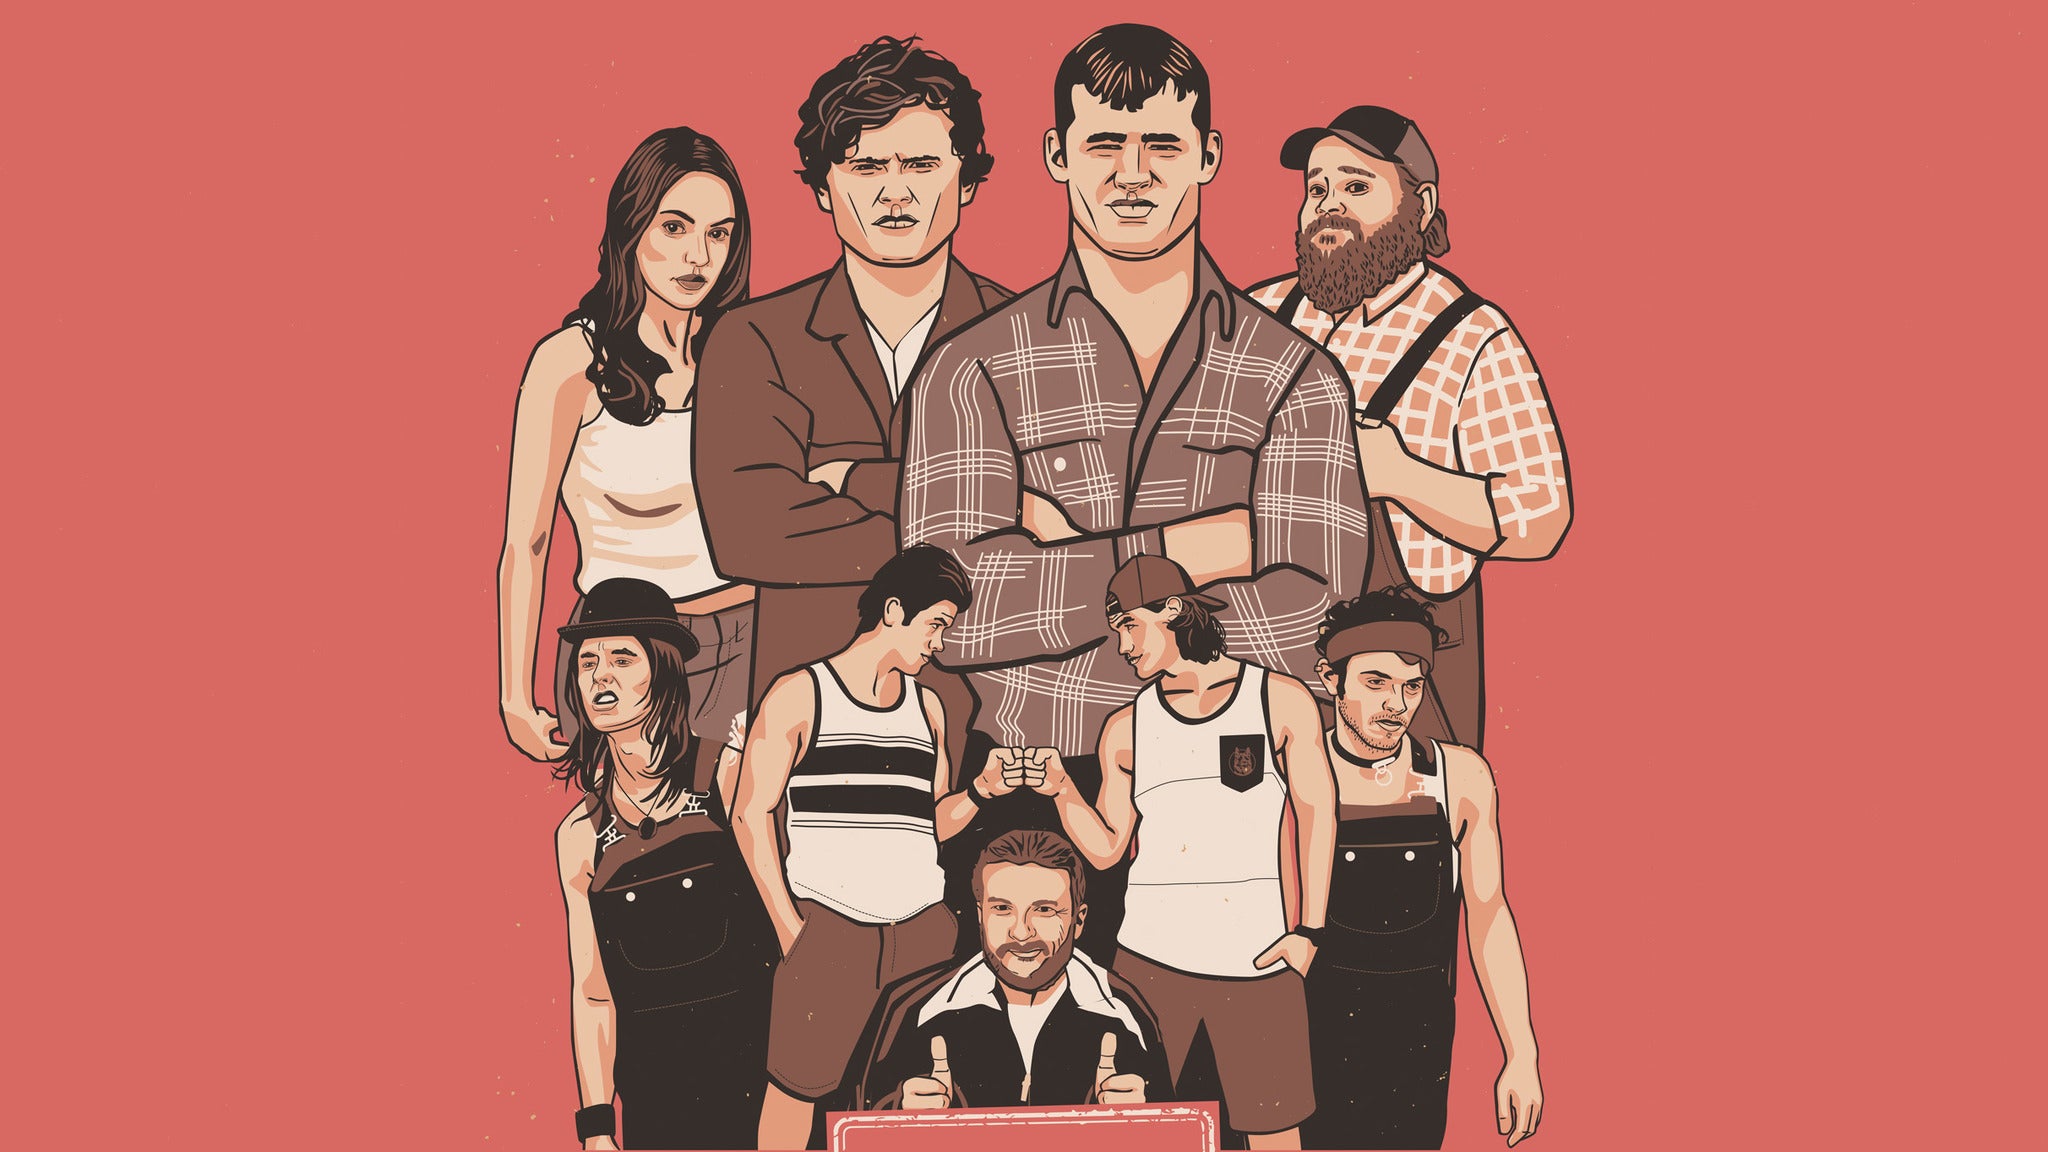 LETTERKENNY LIVE! presale code for early tickets in Indianapolis